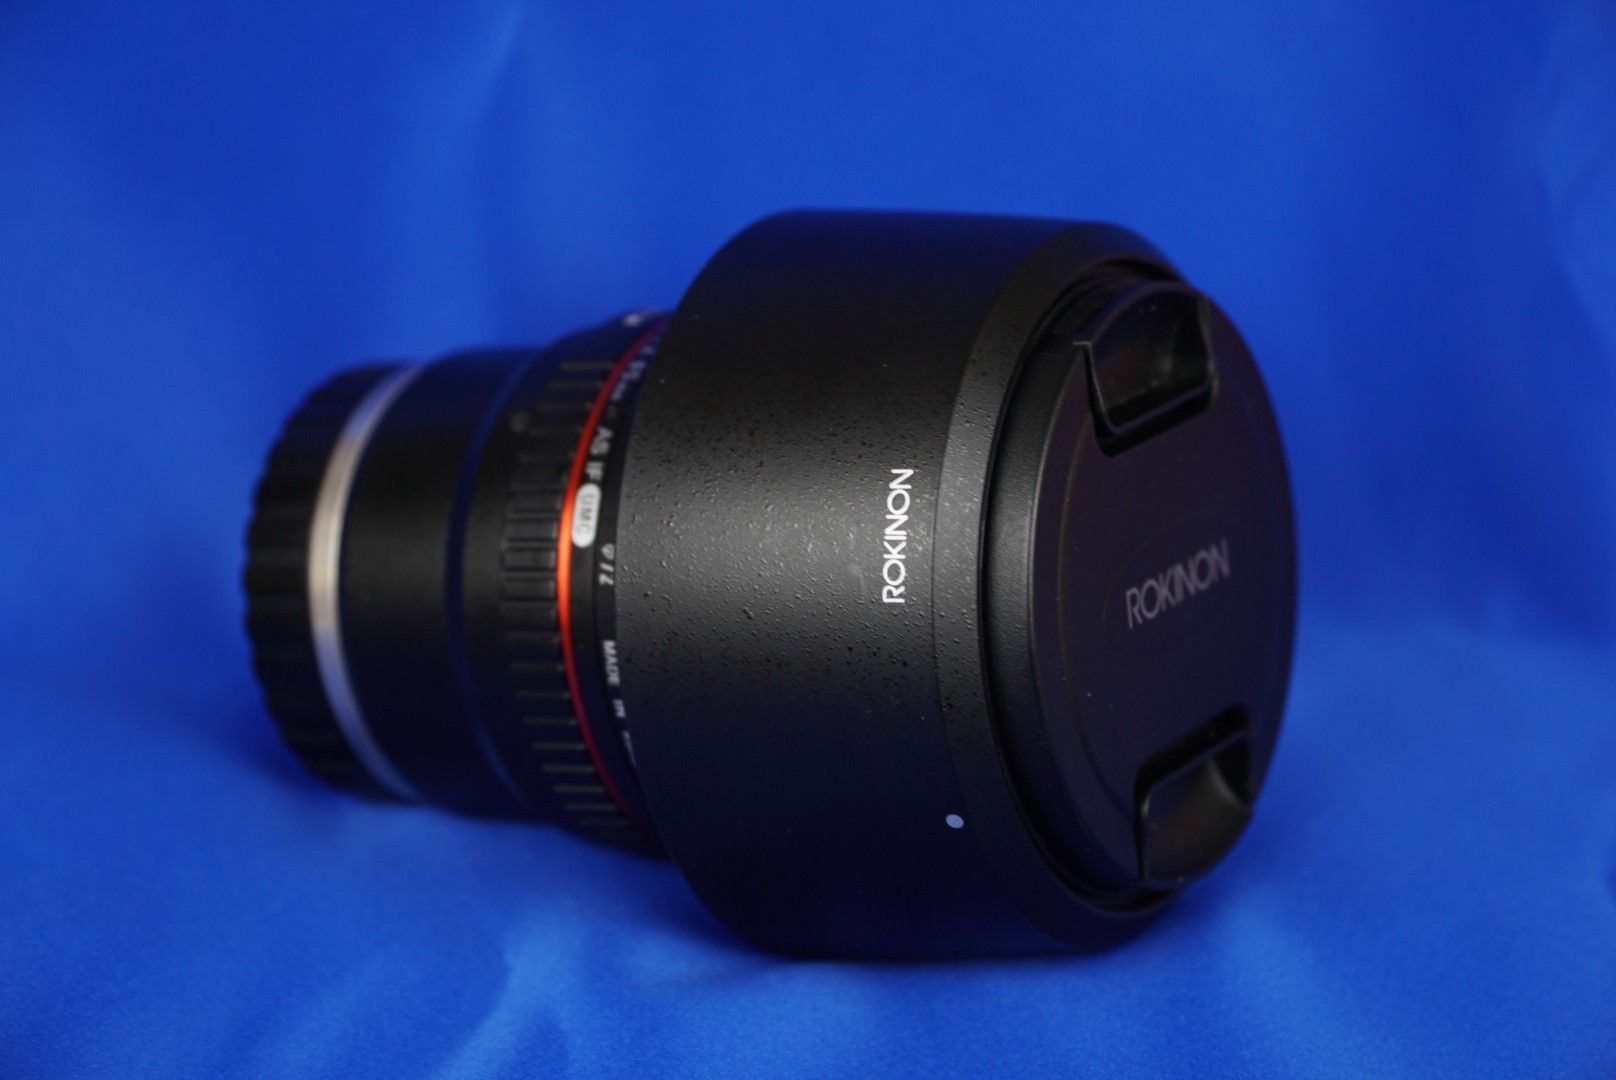 Rokinon 85mm f/1.4 AS IF UMC Lens for Sony